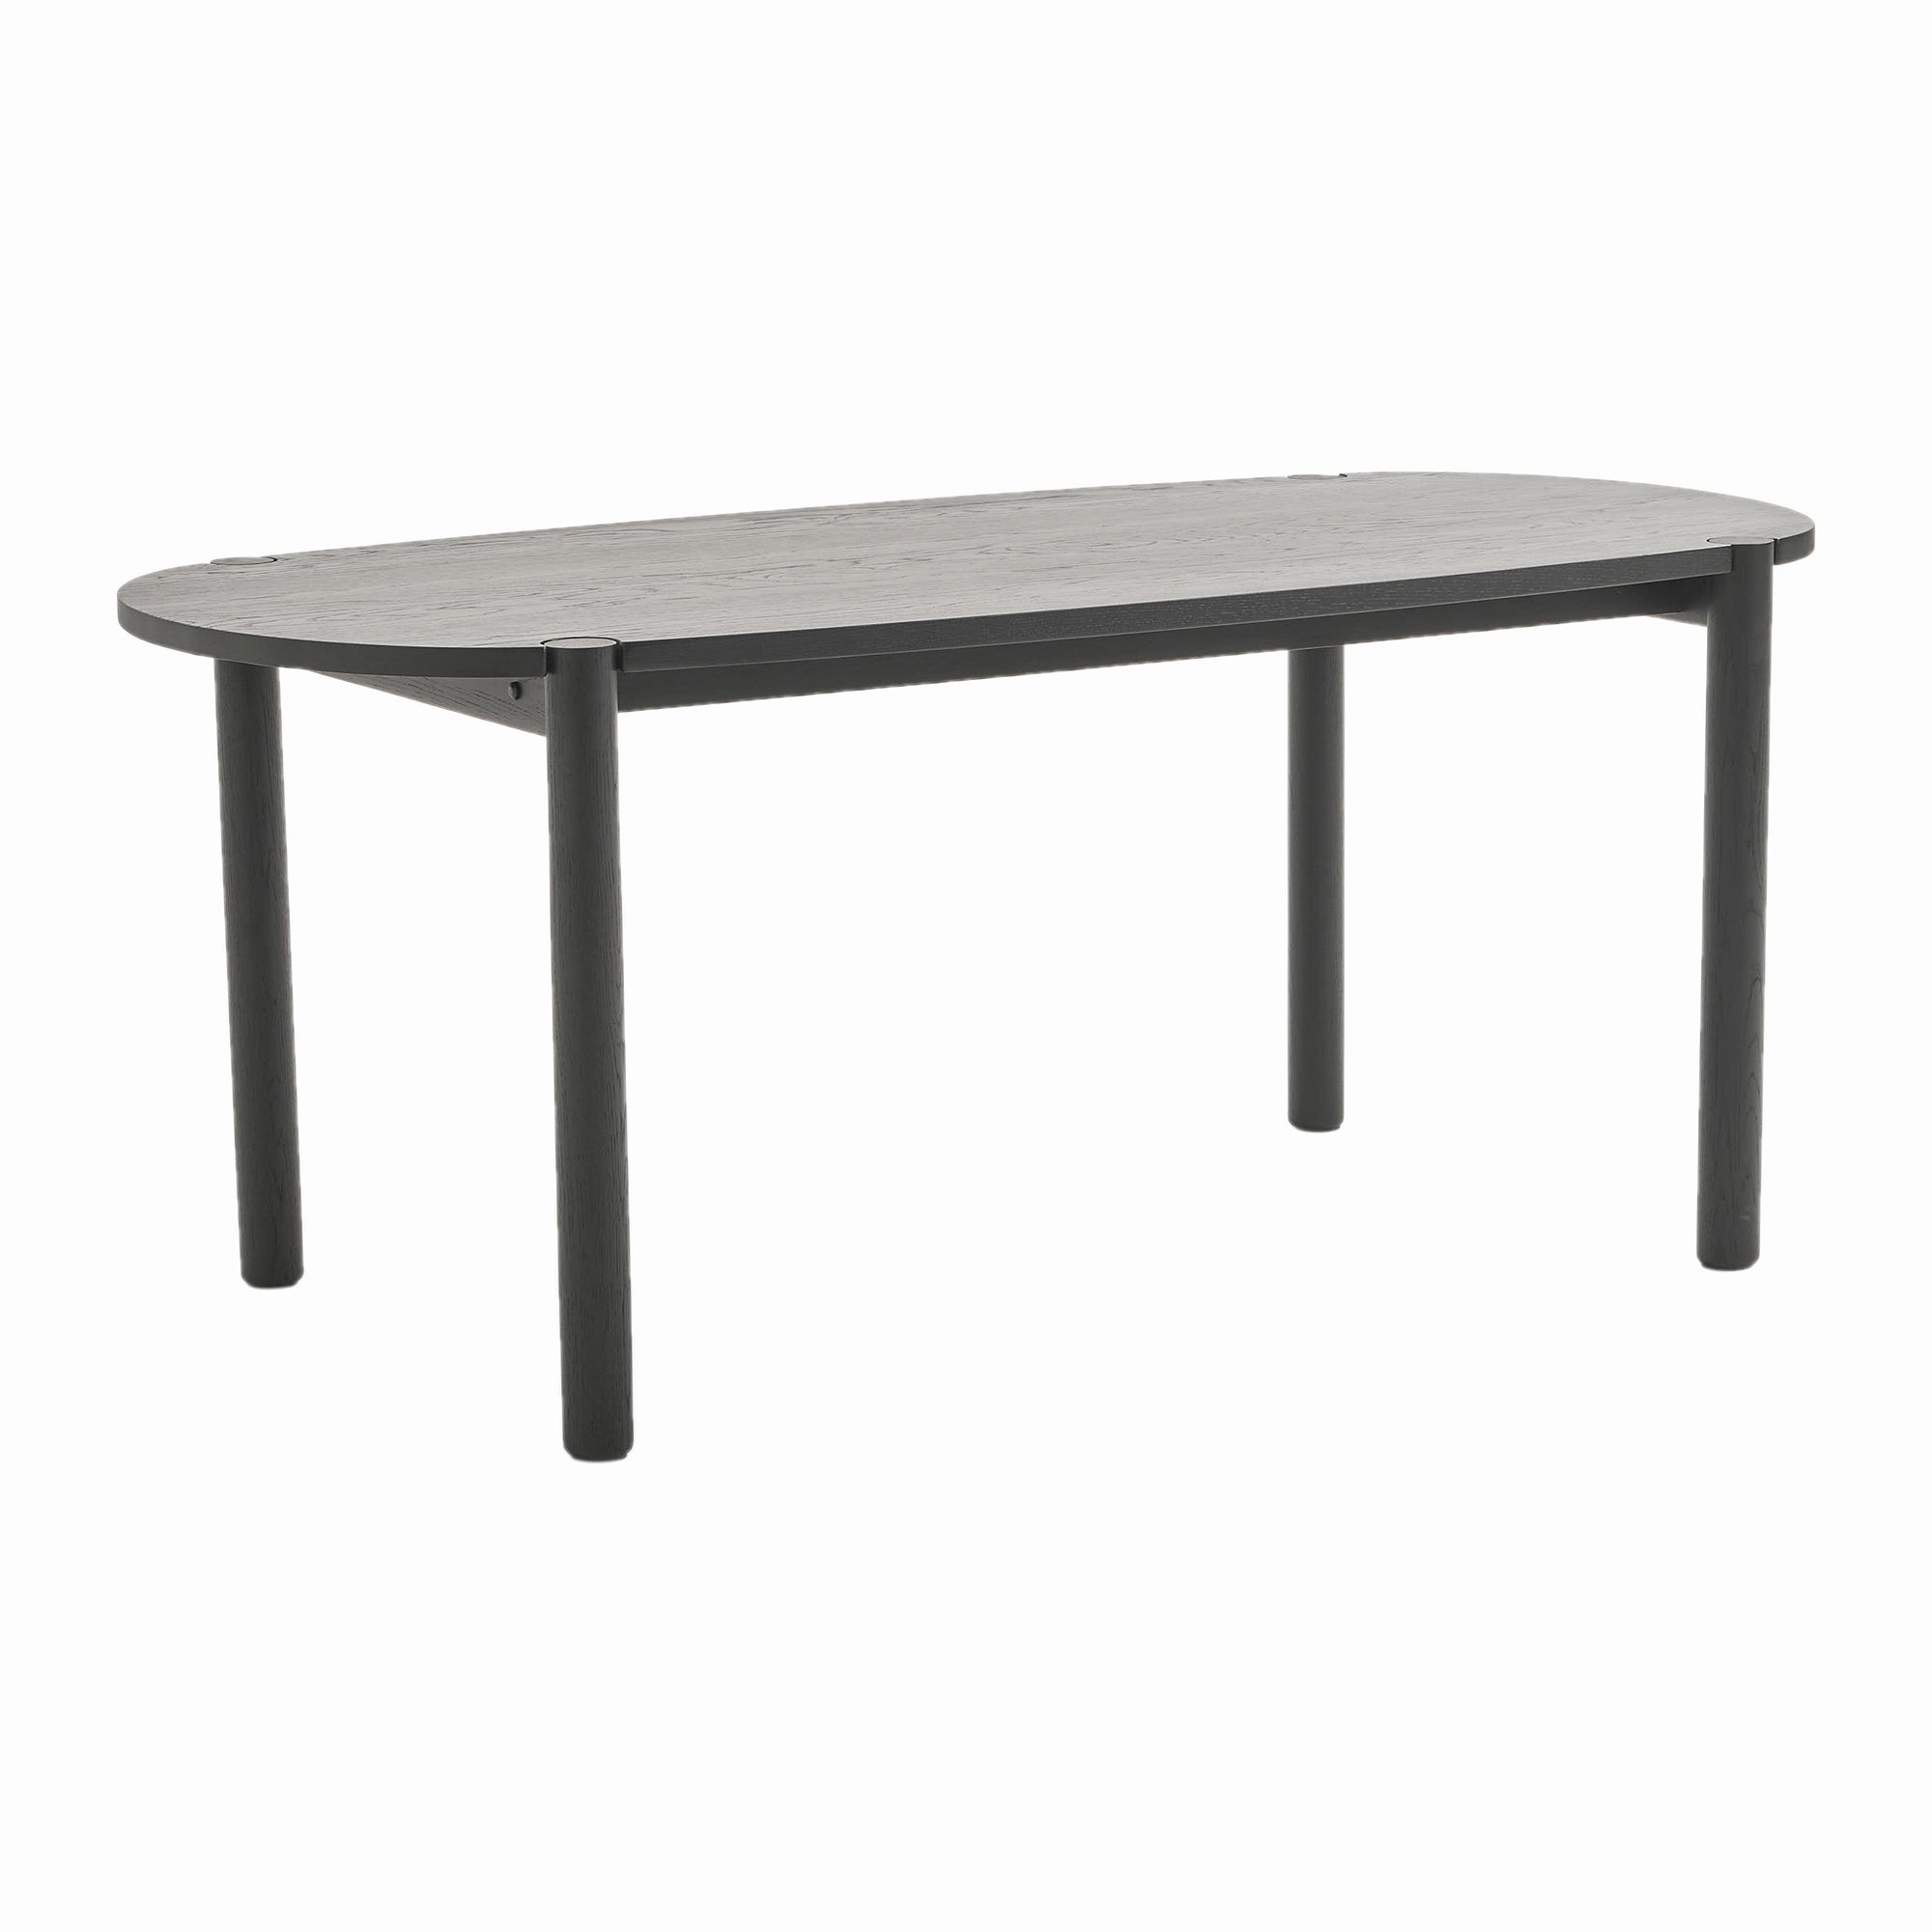 COVE TABLE